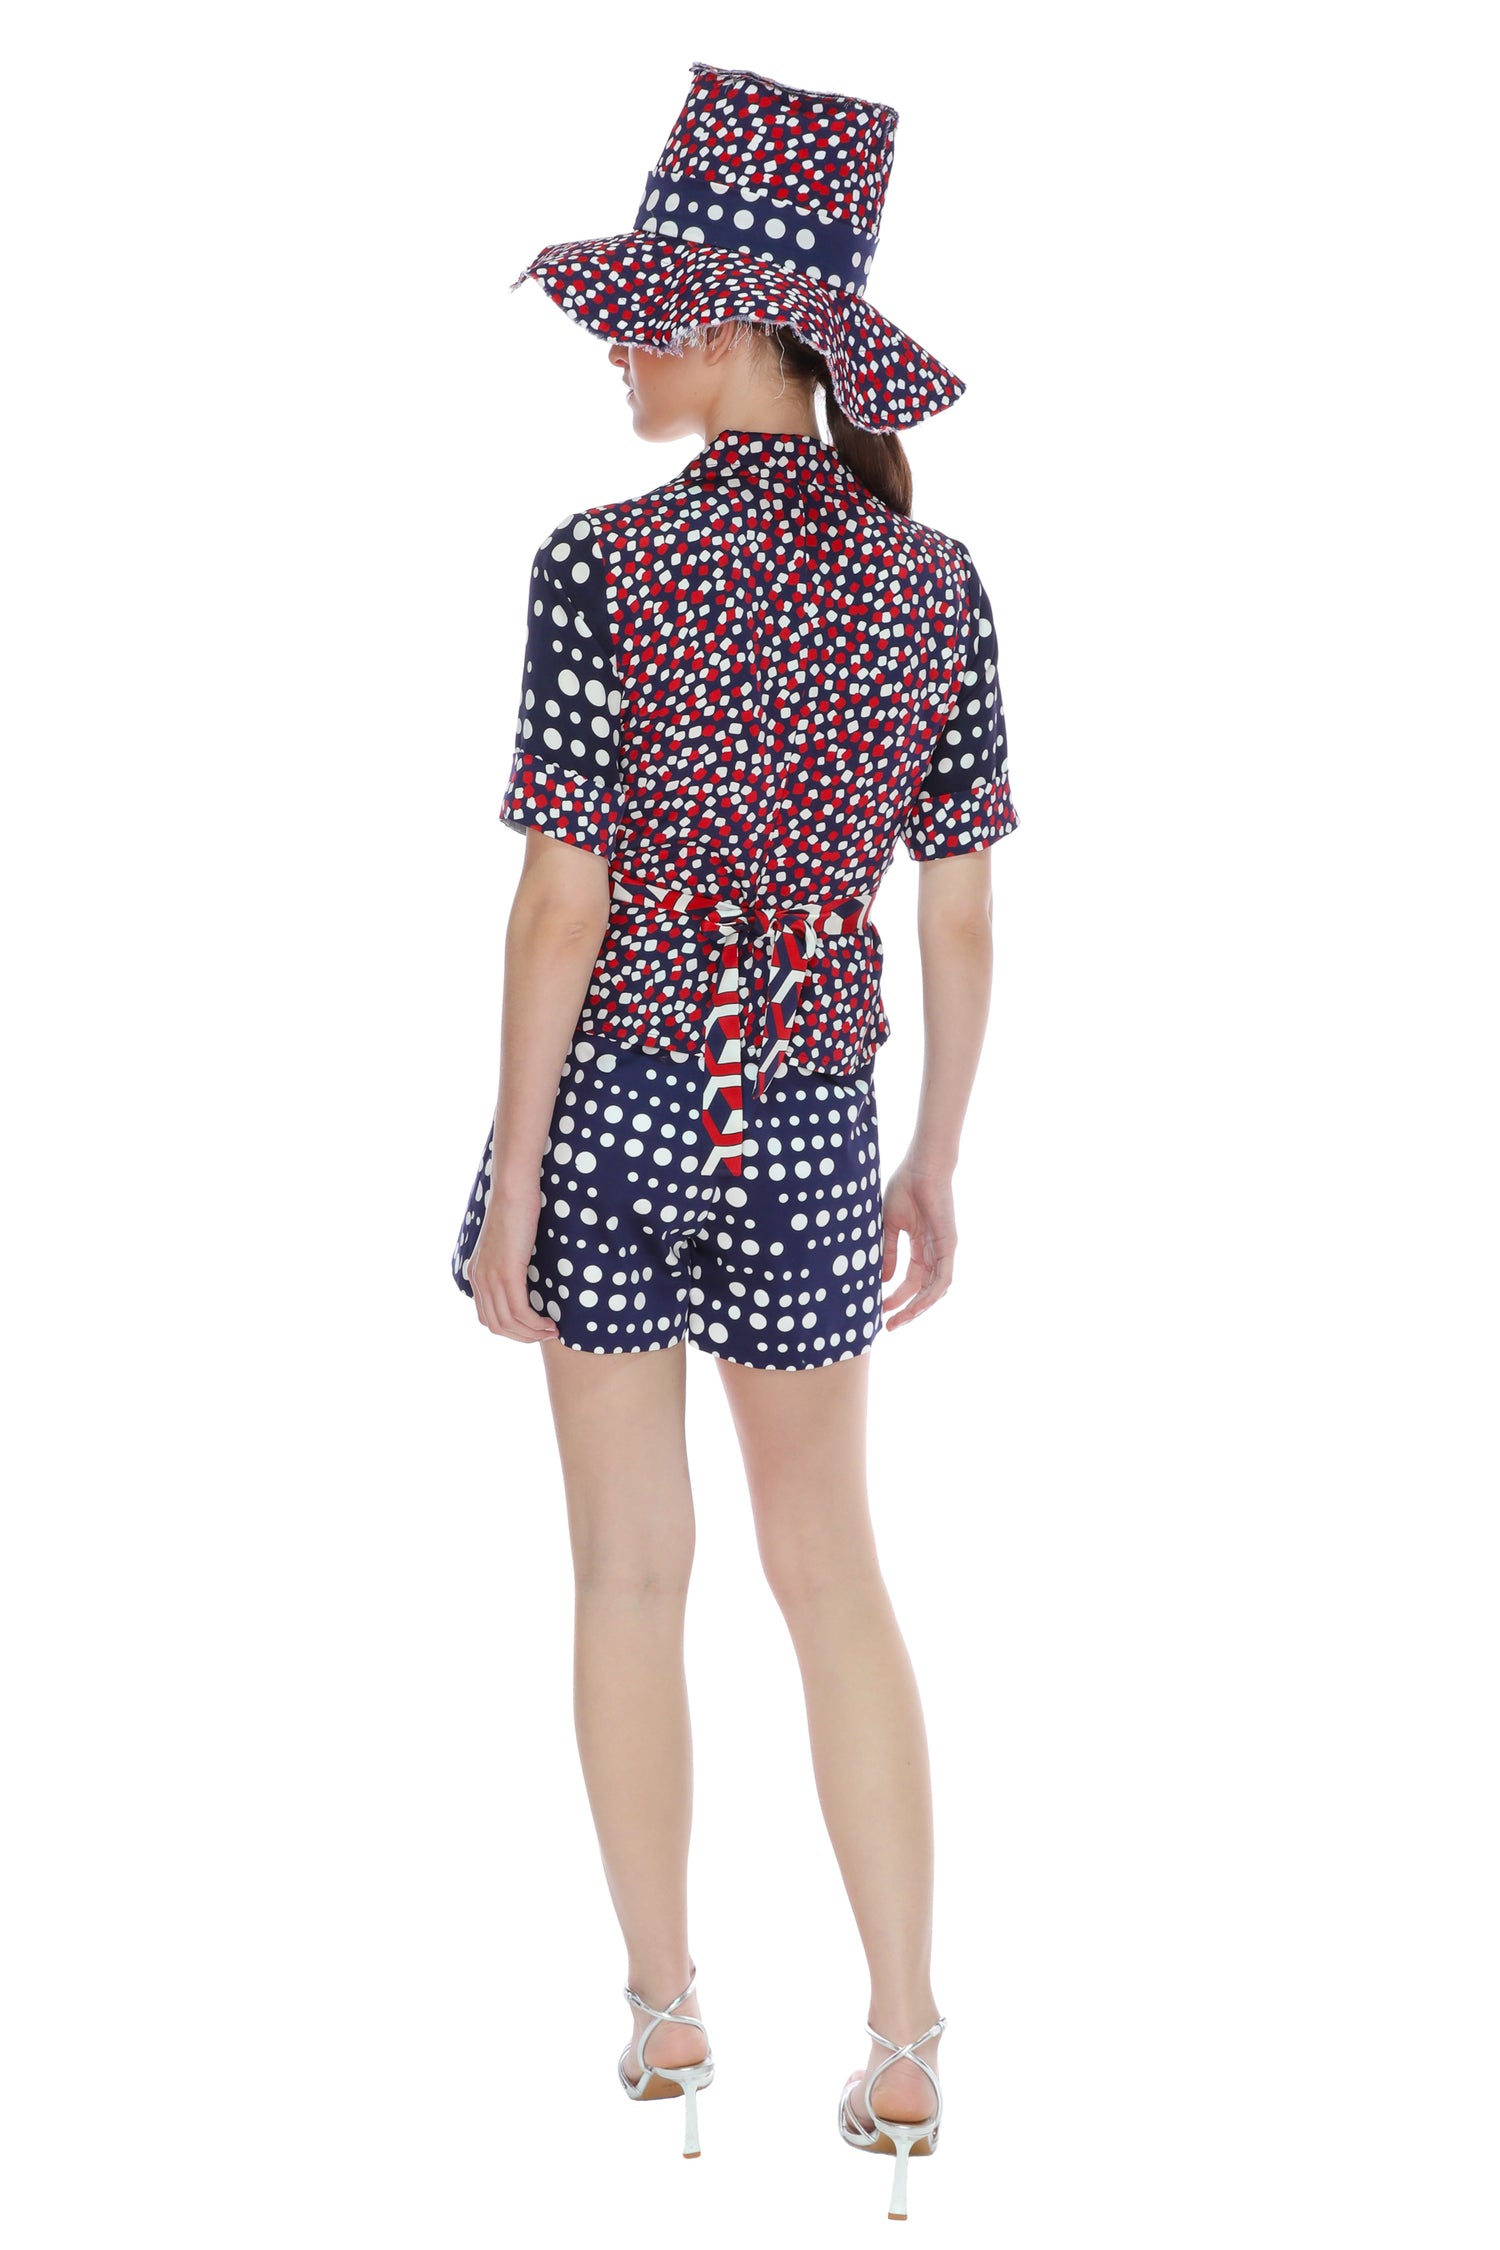 'RED WHITE AND BLUE MASH UP' JAZZY BLOUSE -  - Libertine